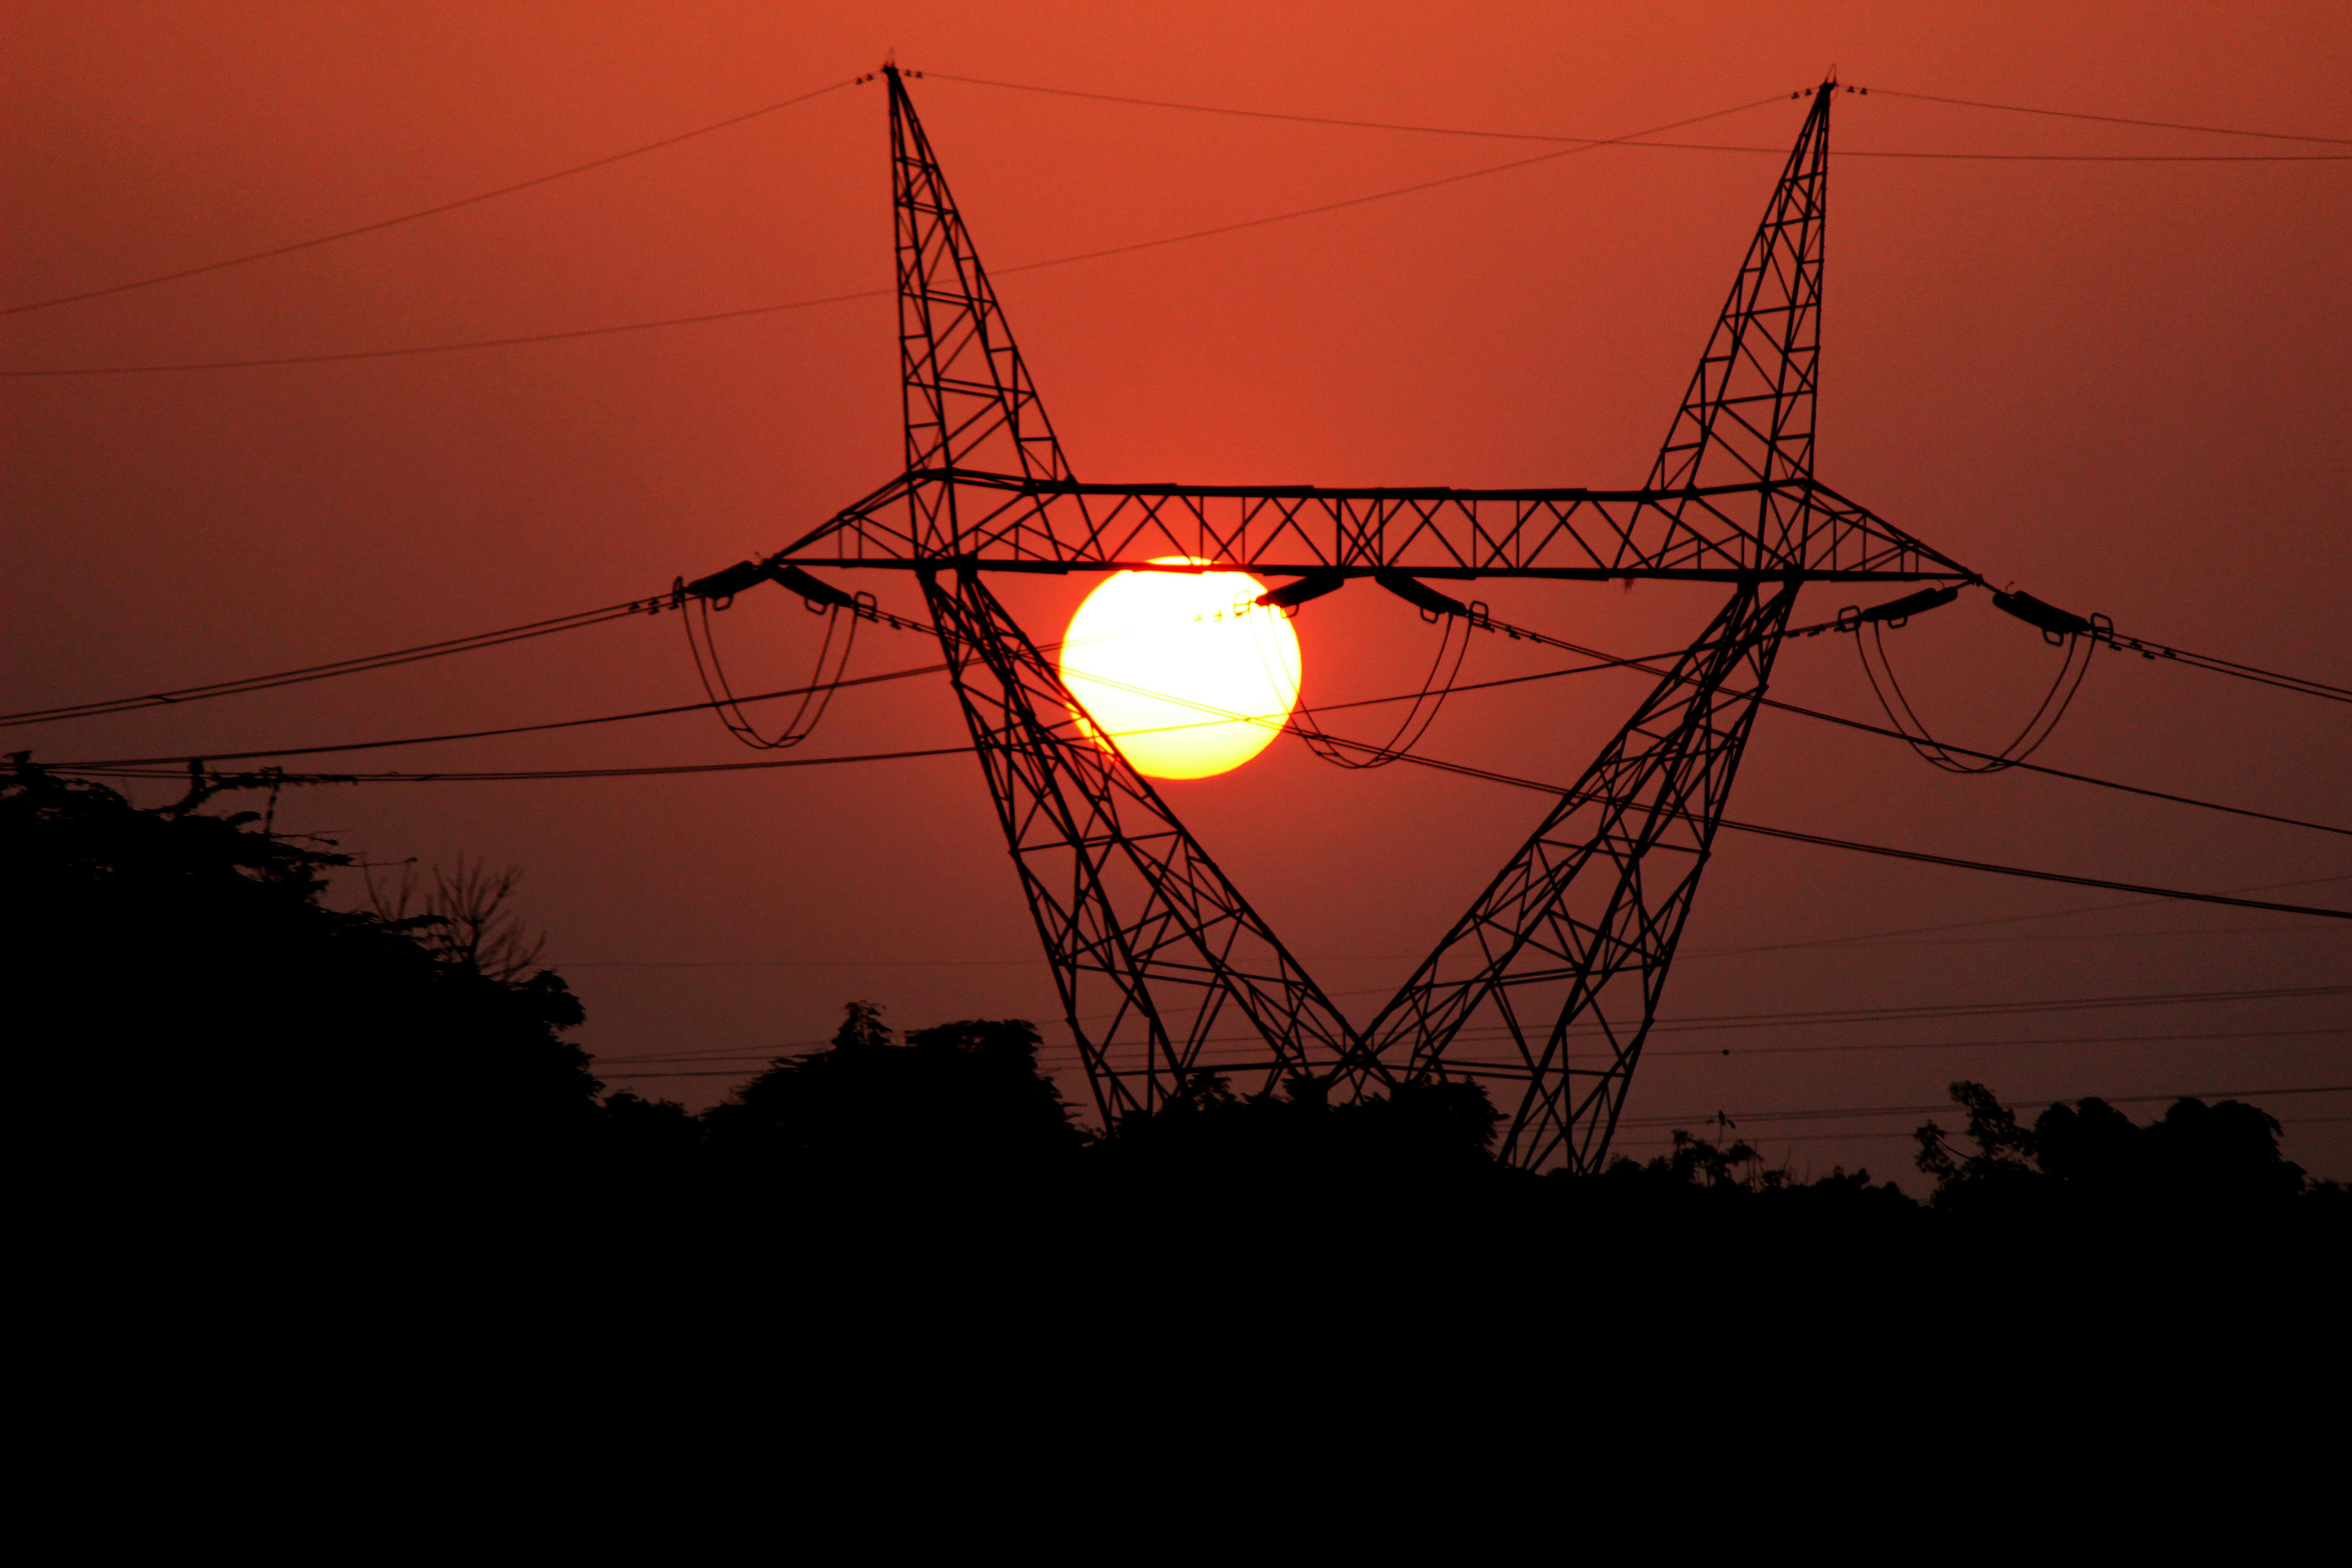 Free stock photo of electrical lines, electrical poles, sunset